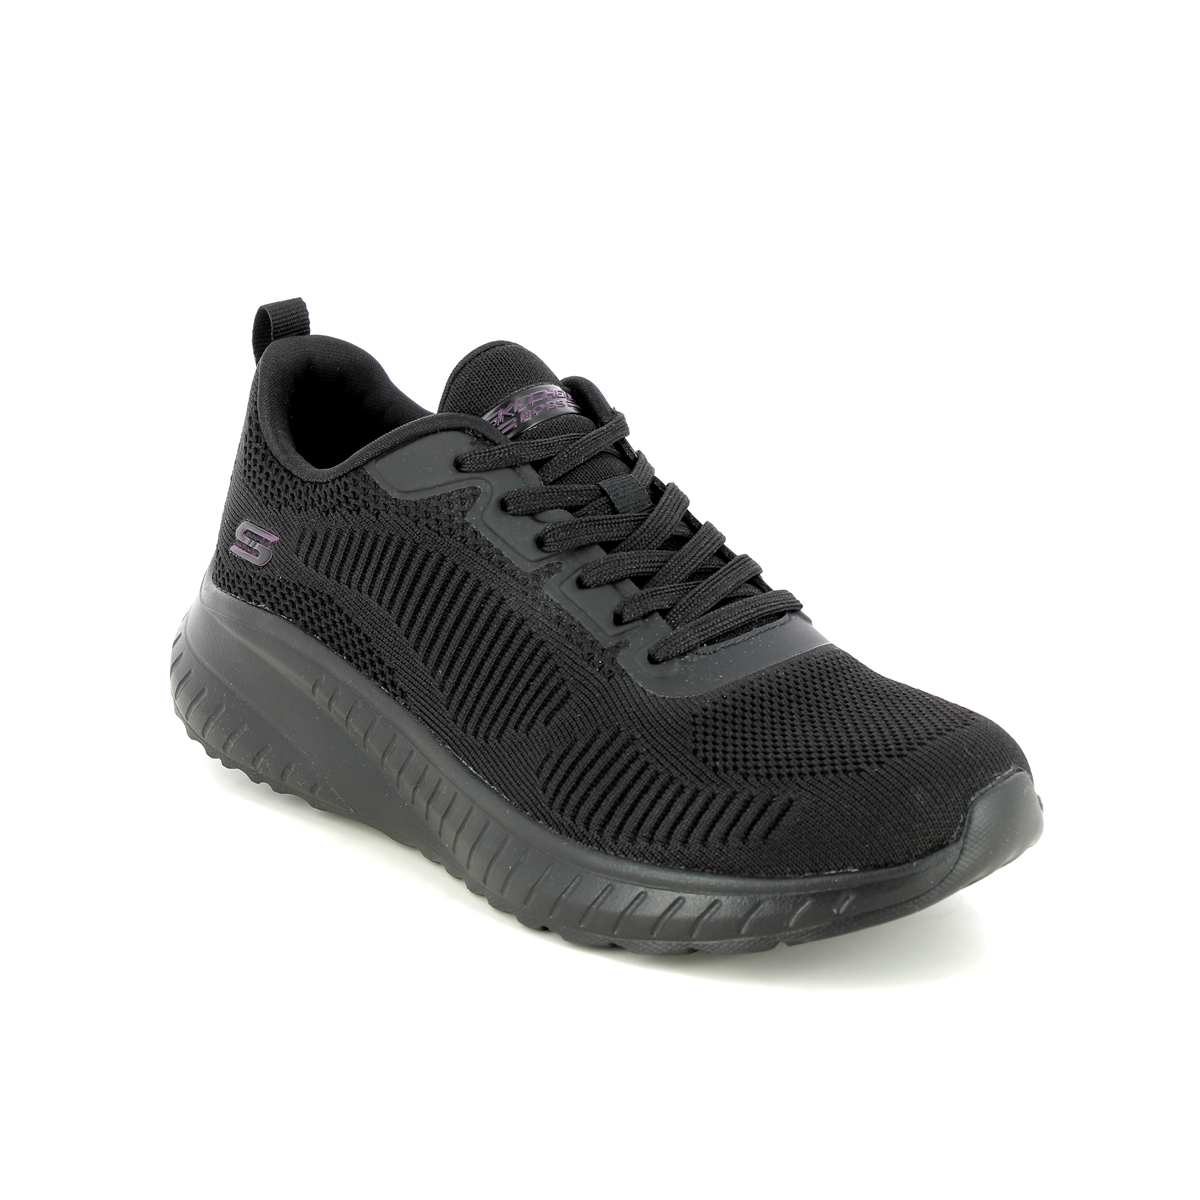 Skechers Bobs Squad Chaos BBK Black Womens trainers 117209 in a Plain Textile in Size 7